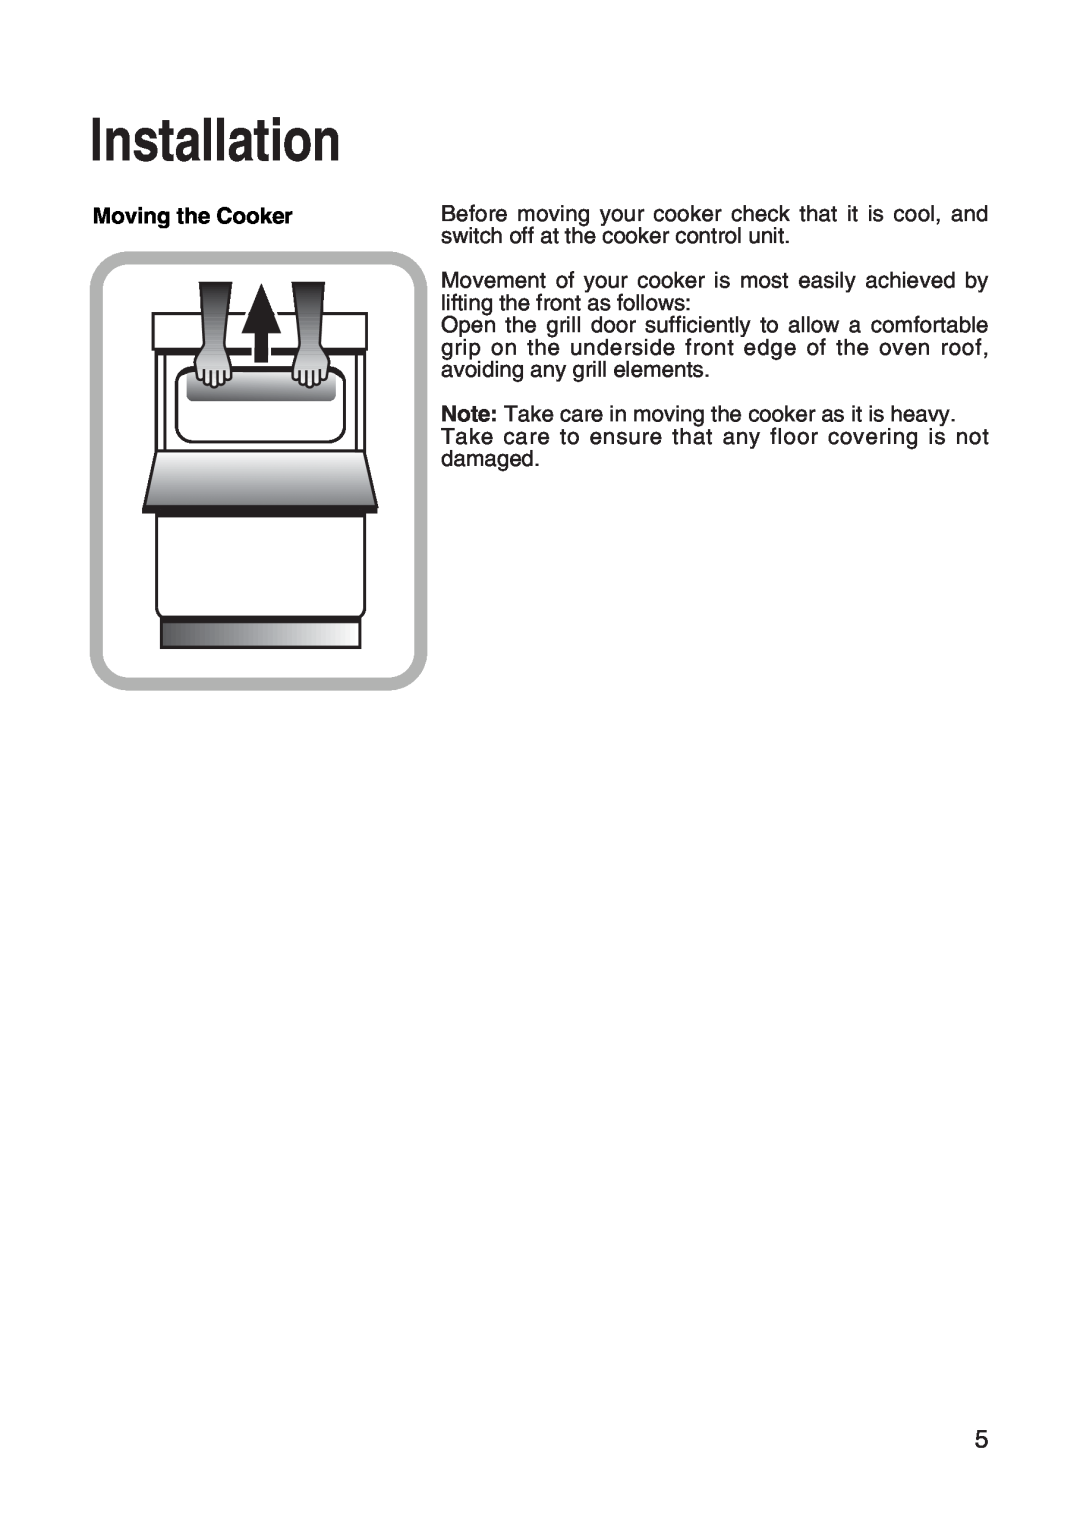 Hotpoint EW31 installation instructions Installation, Moving the Cooker 